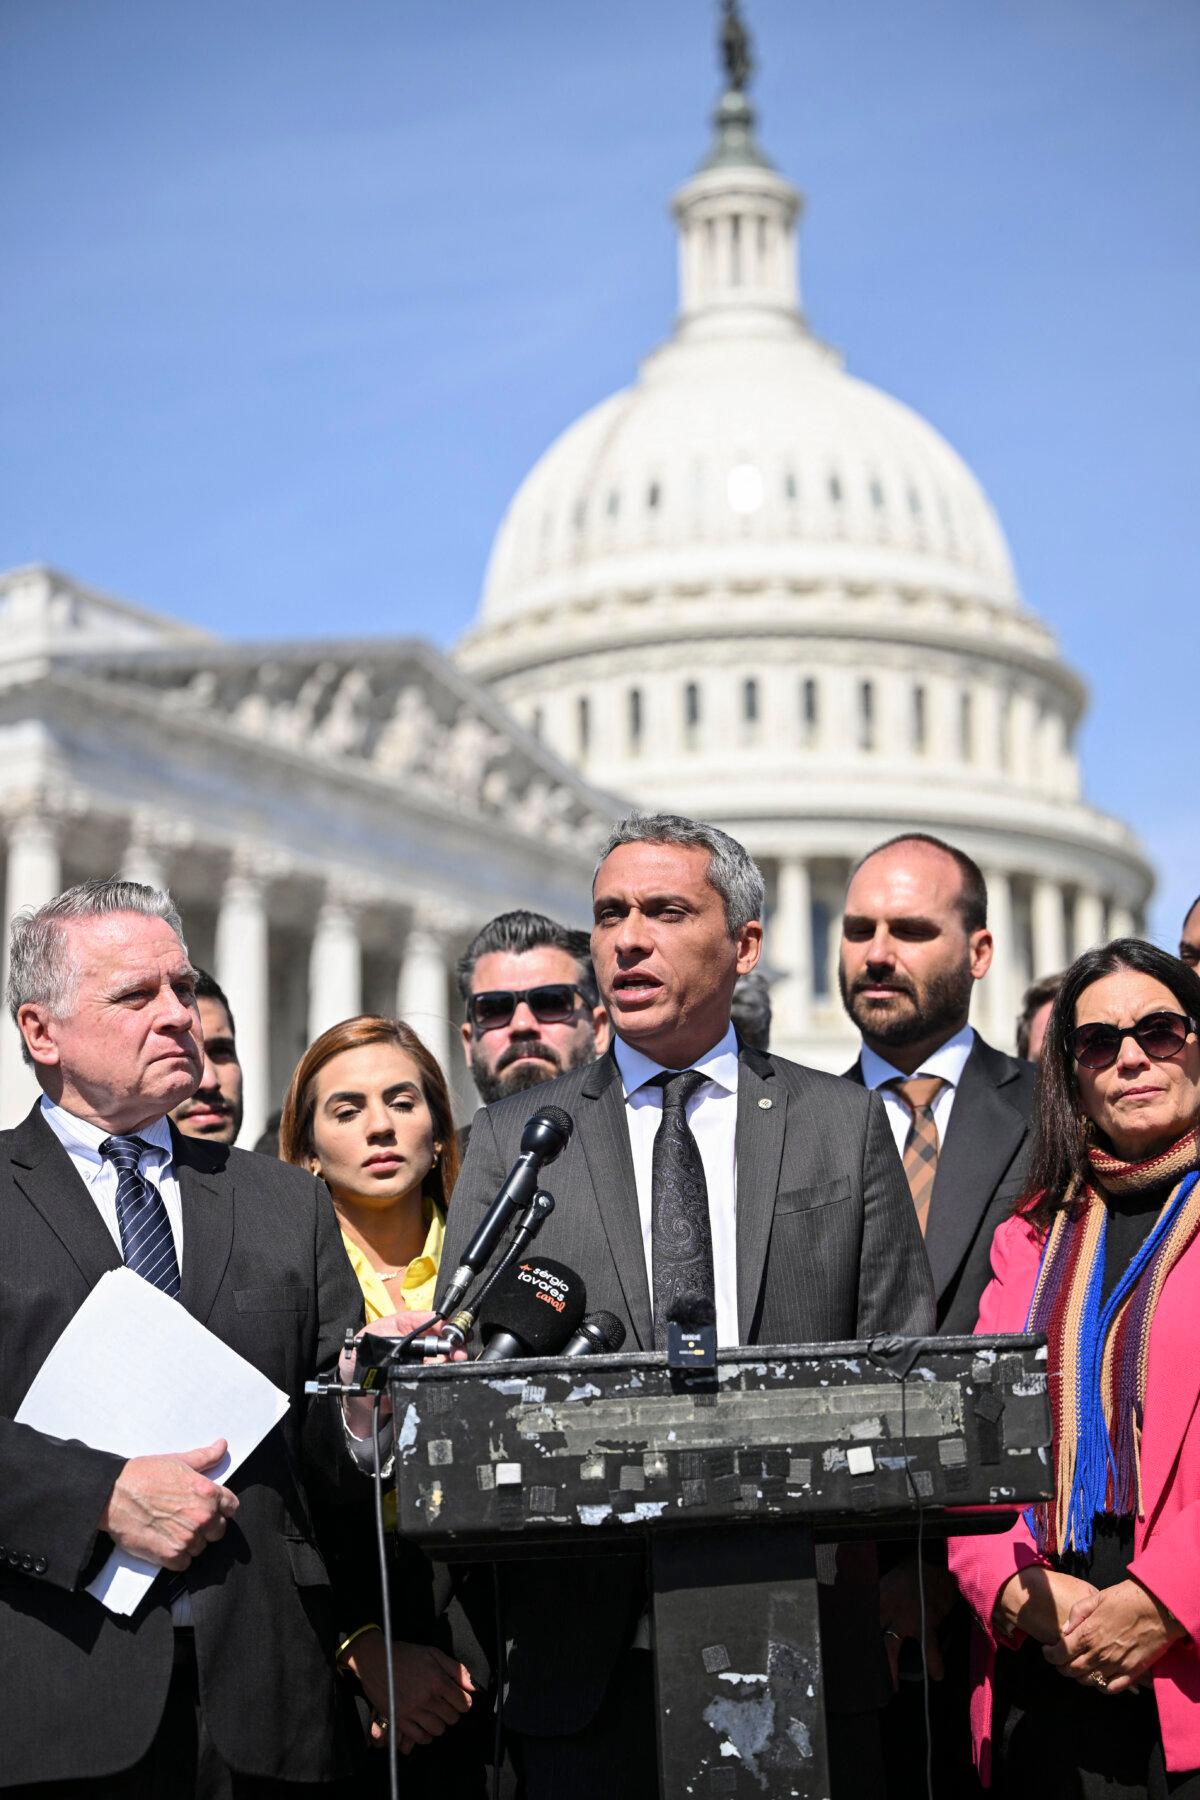 Member of the Brazil Chamber of Deputies Gustavo Gayer, next to Rep. Chris Smith (R-N.J.), speaks at a news conference on "Brazil: Democracy, Freedom, and Rule of Law Under Attack?" outside of the US Capitol on March 12, 2024. (Mandel Ngan/AFP via Getty Images)